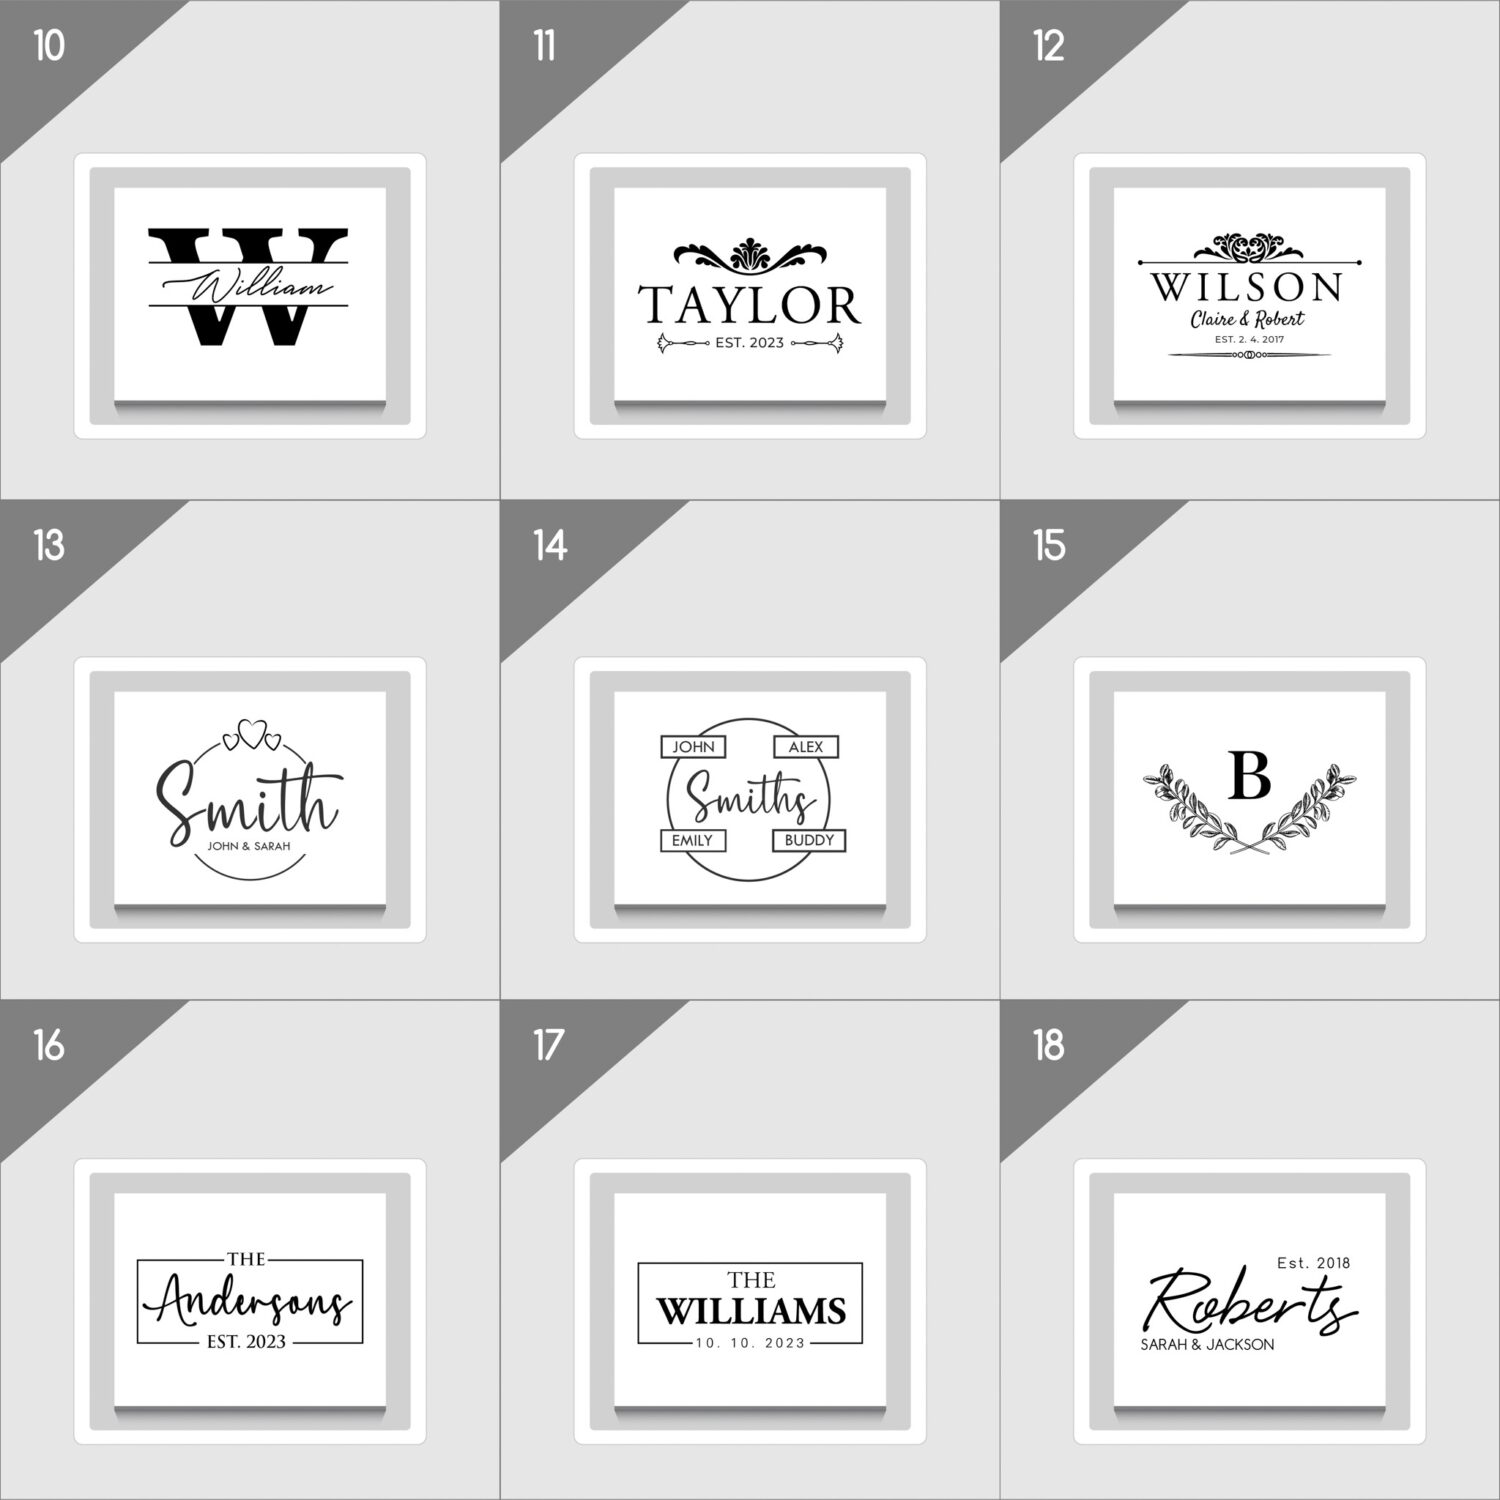 Collection of monochromatic, personalized logo designs for various family names and establishments with decorative elements.